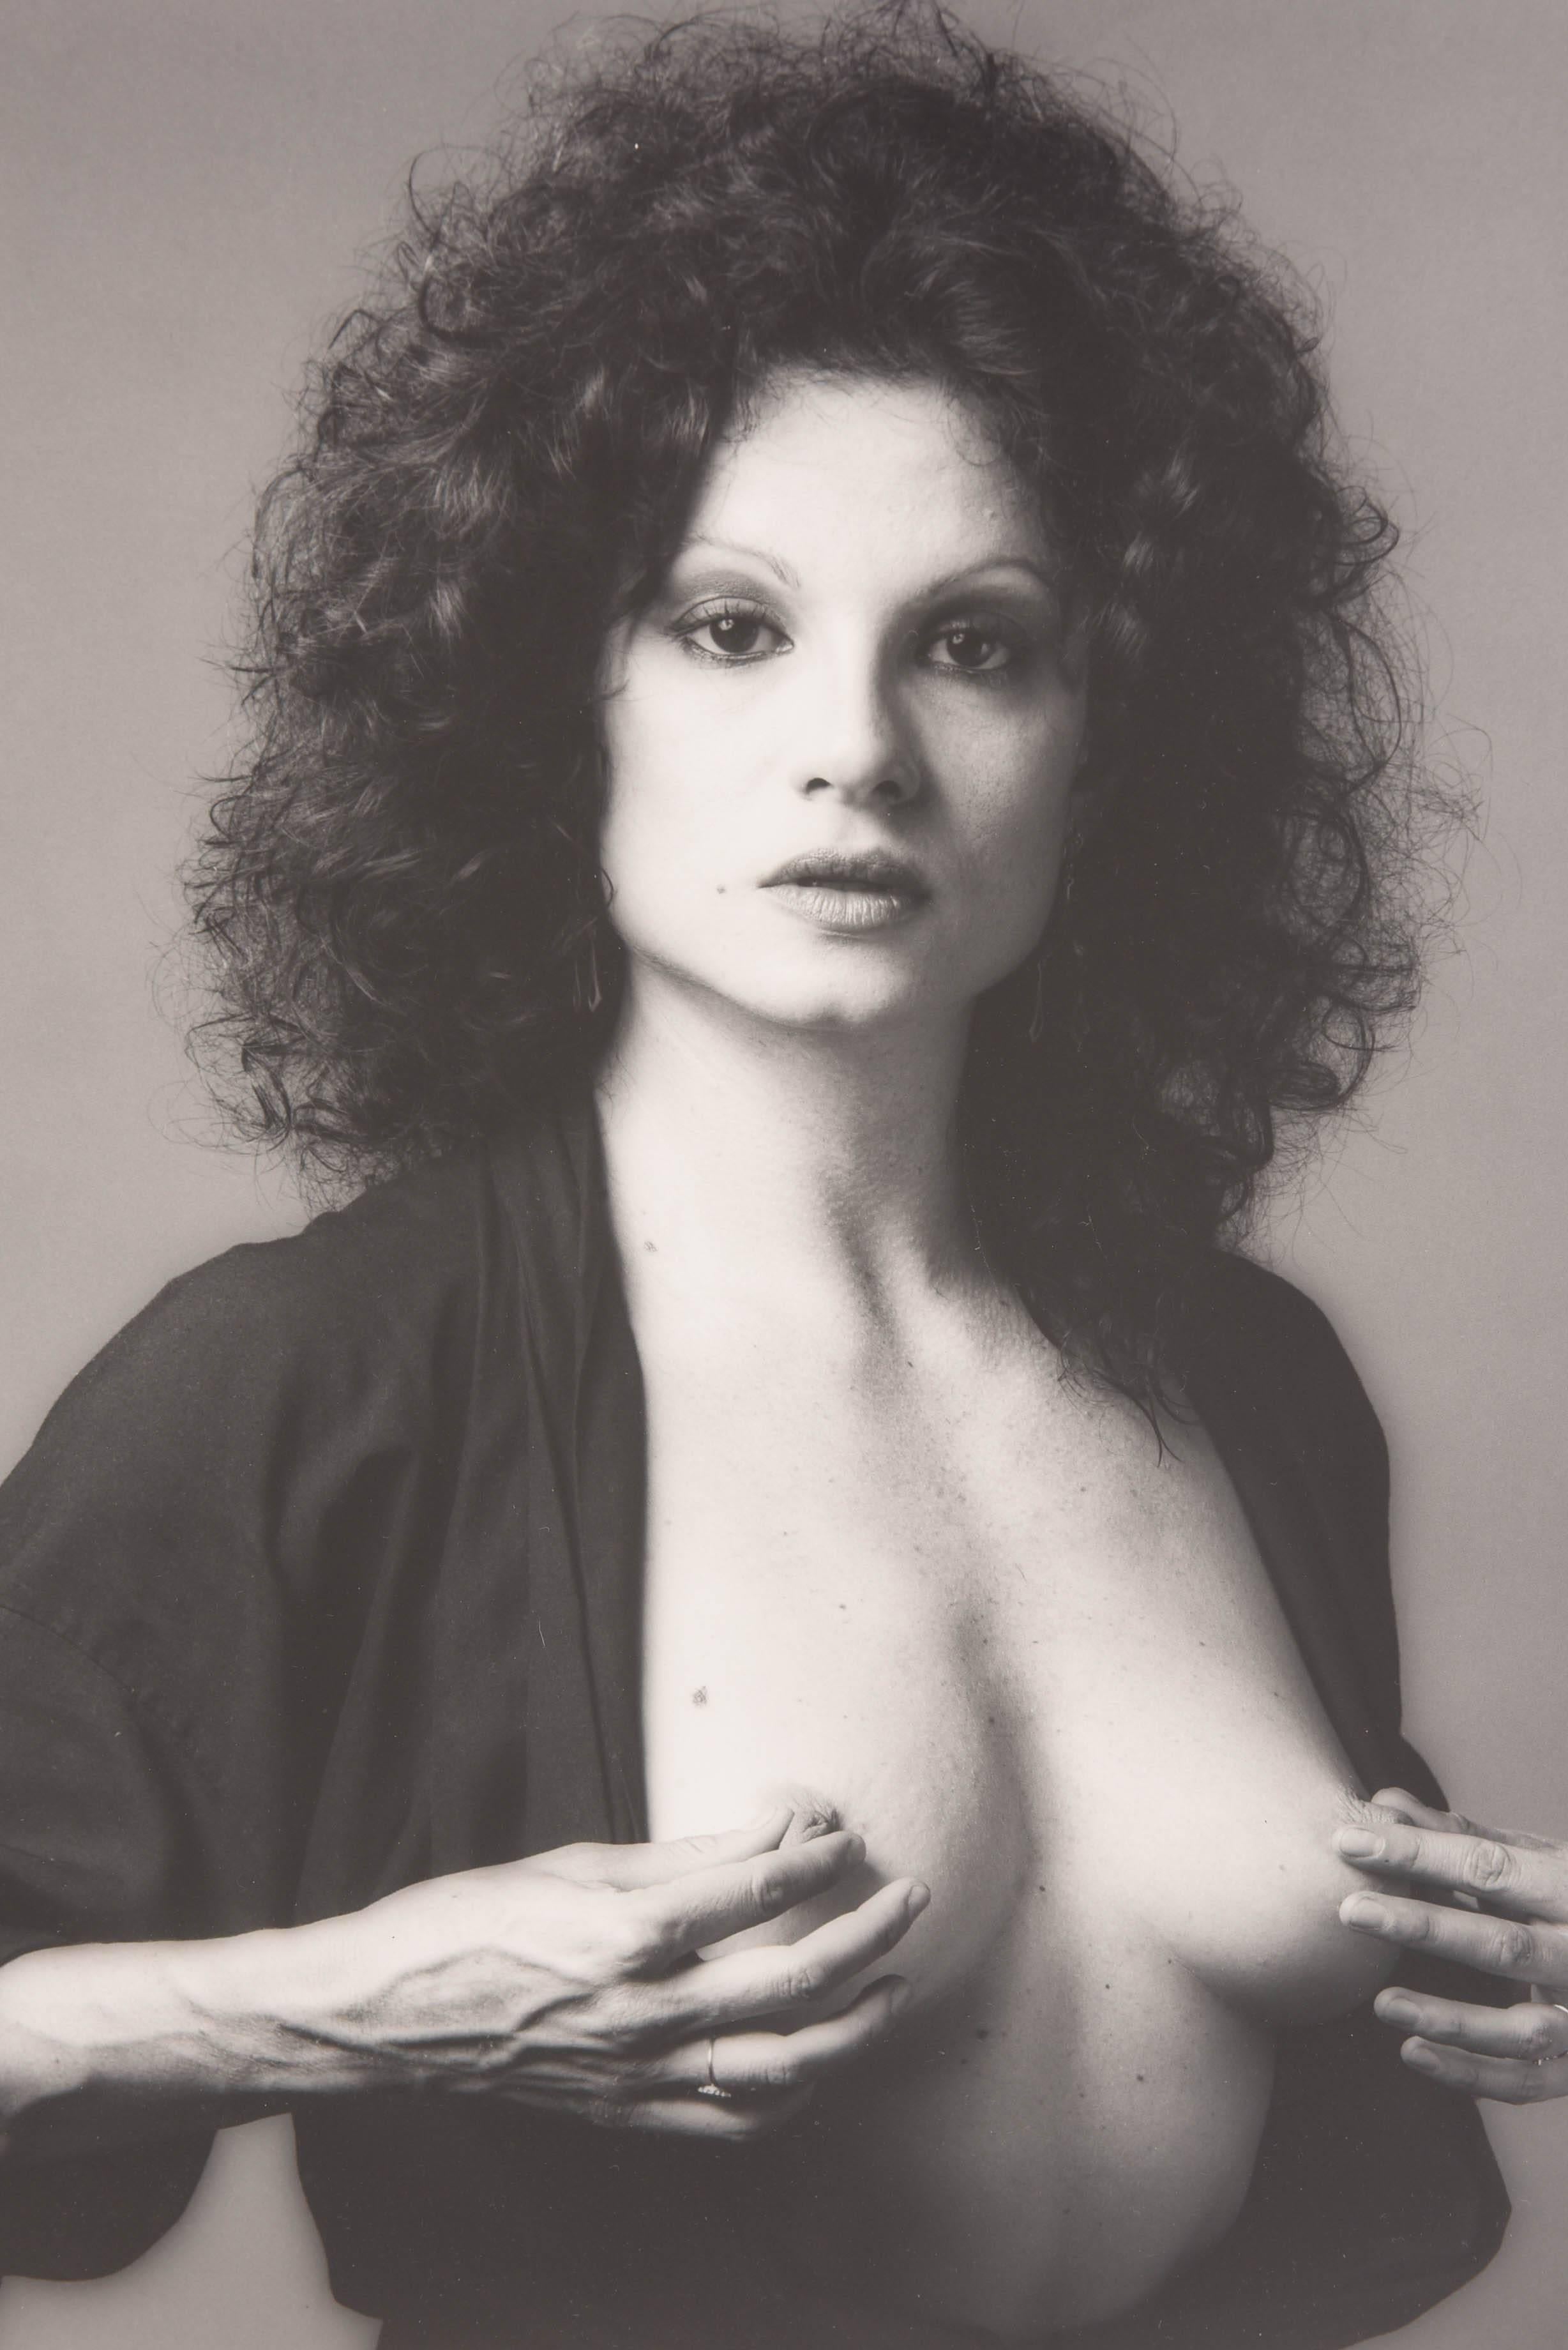 Between 1980 and 1982 Robert Mapplethorpe photographed Lisa Lyon culminating in 
